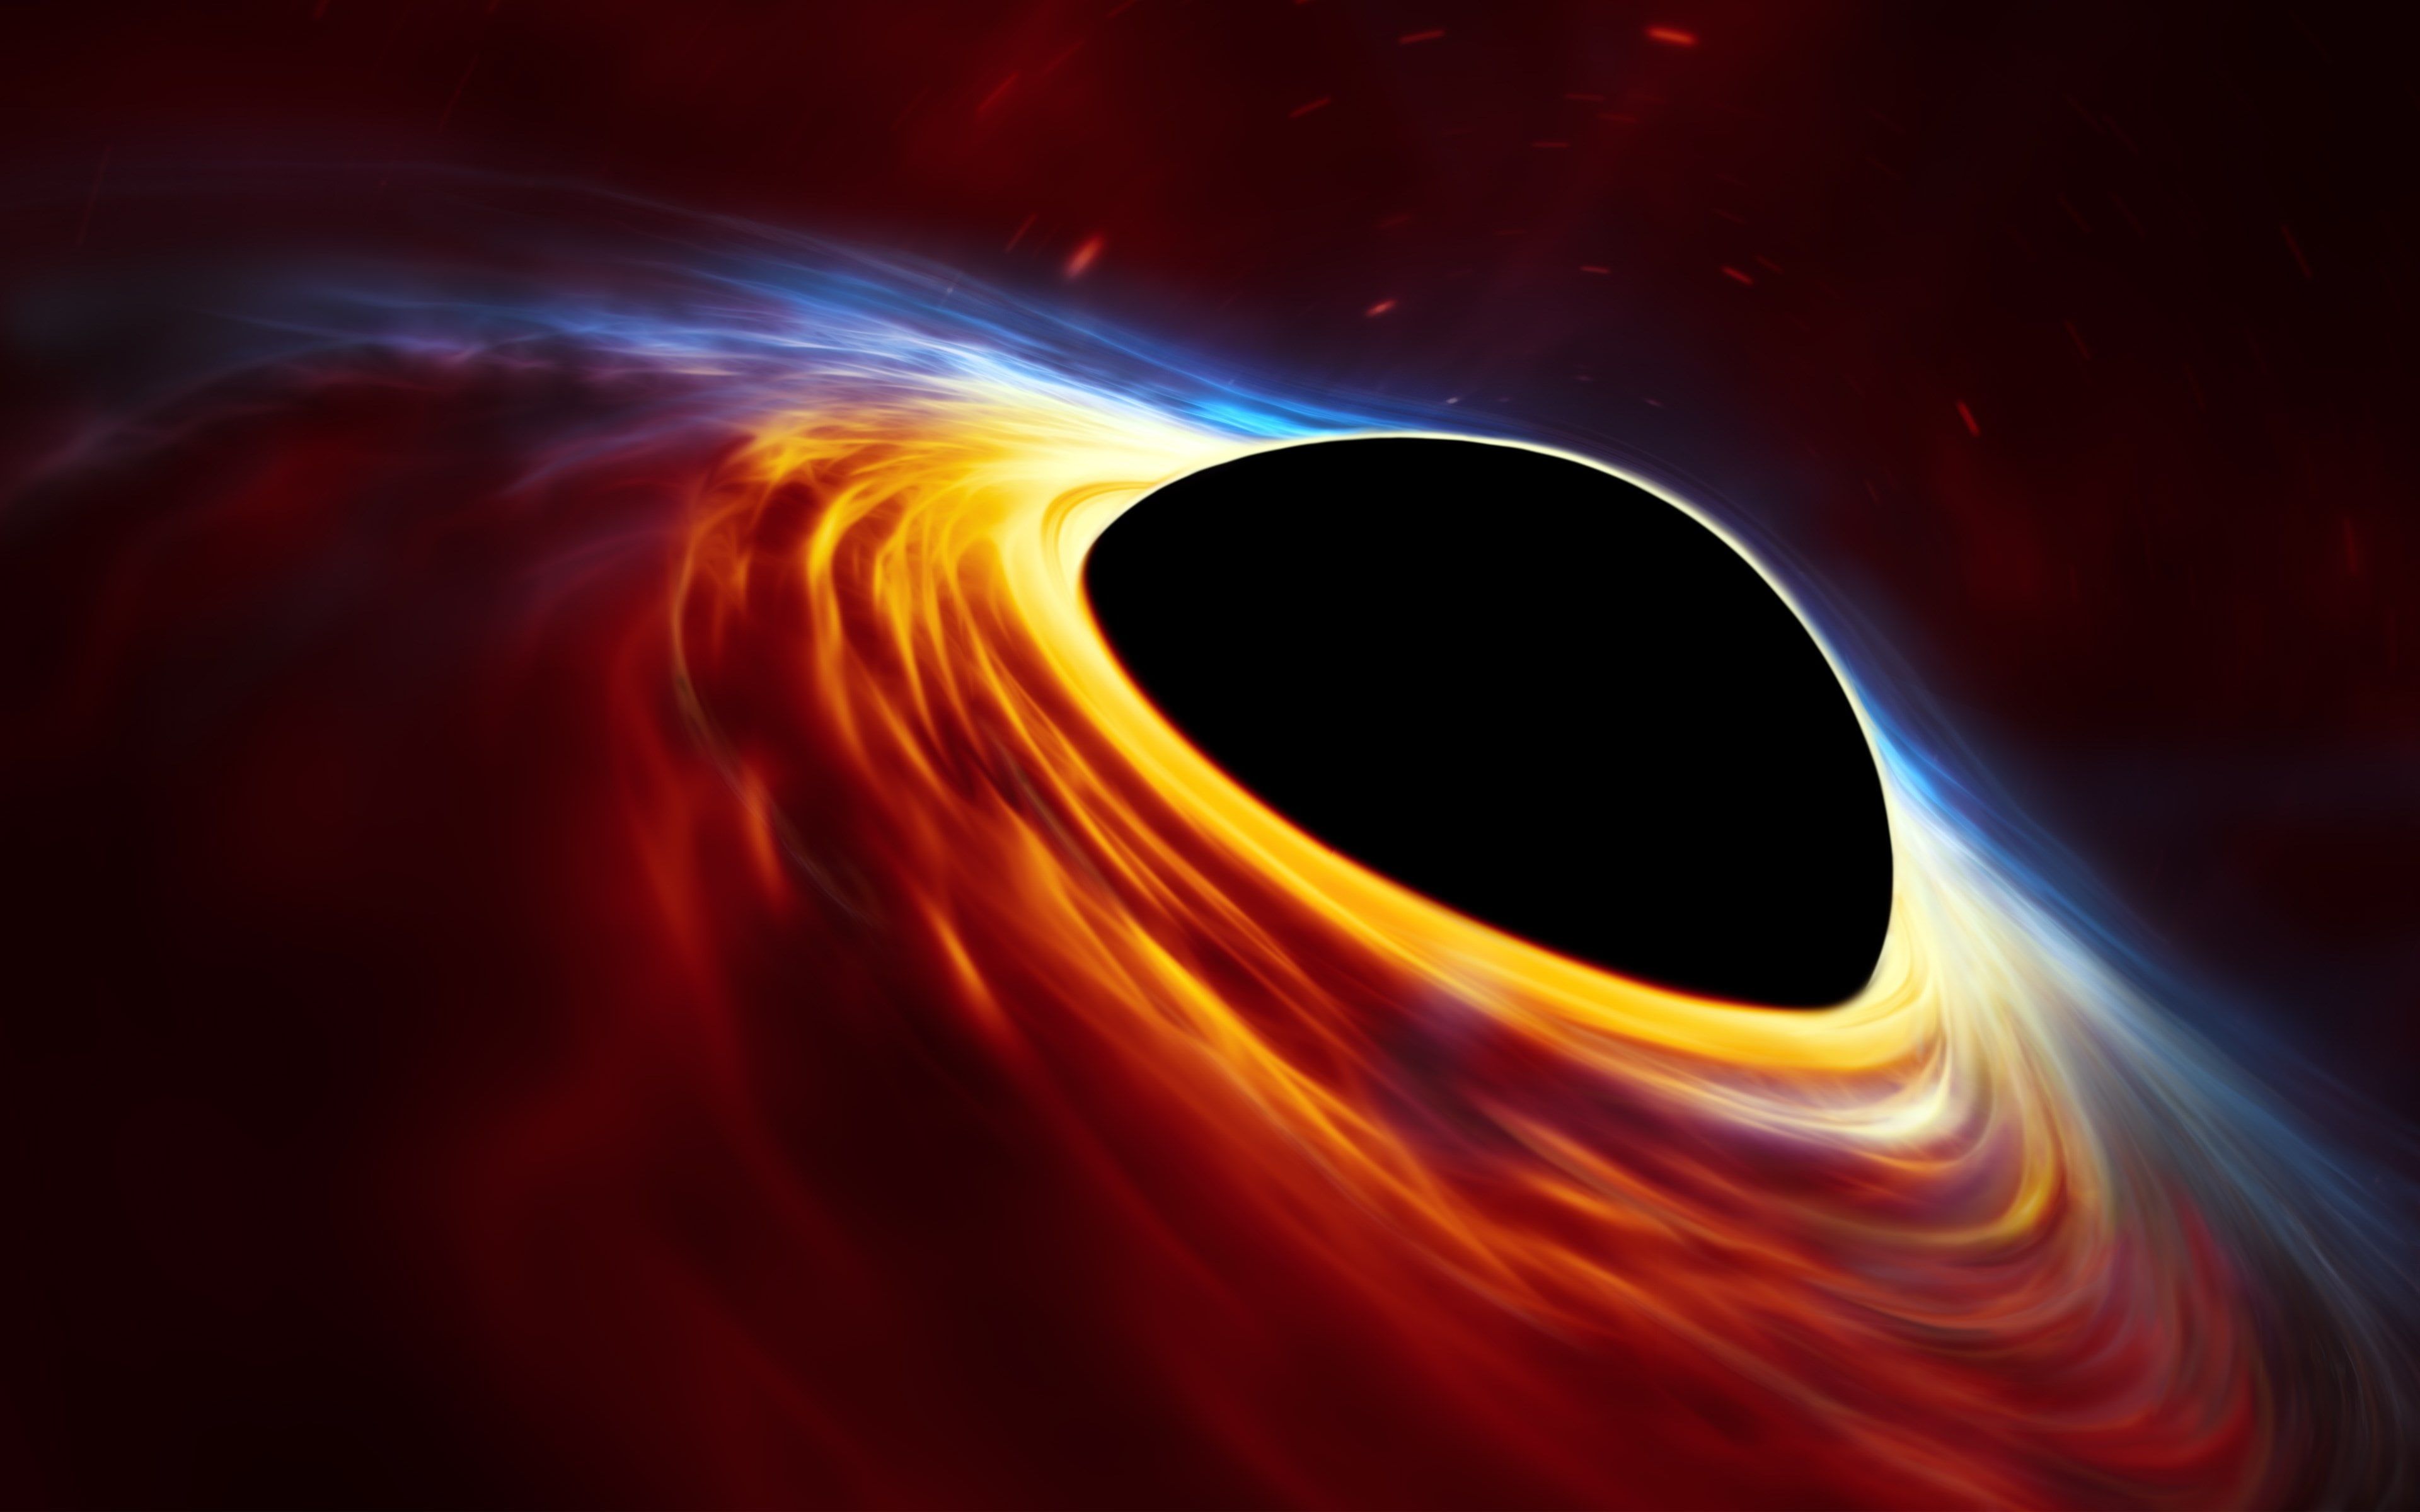 space 4k download for pc HD K #wallpaper #hdwallpaper #desktop. Black hole wallpaper, Black hole, HD wallpaper